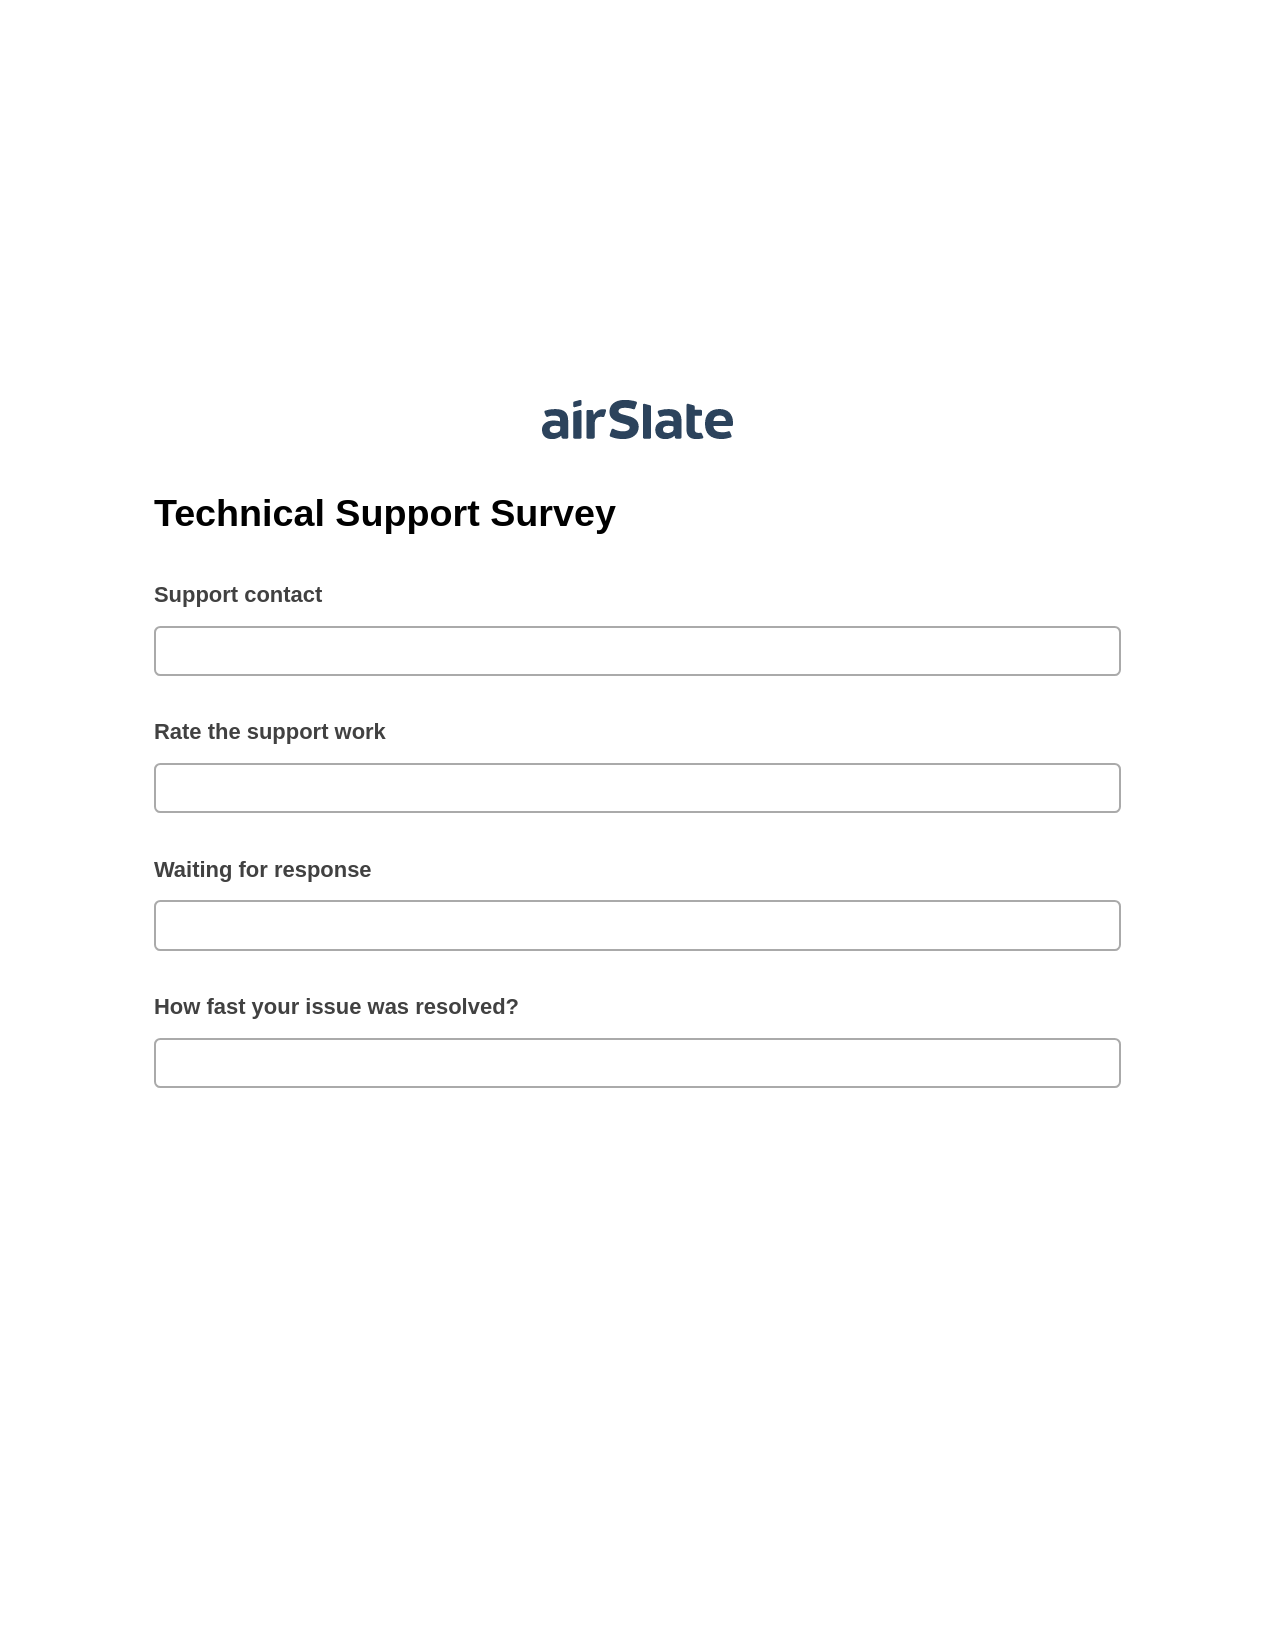 Technical Support Survey Pre-fill from CSV File Bot, Assign Roles to Recipients Bot, Export to Excel 365 Bot